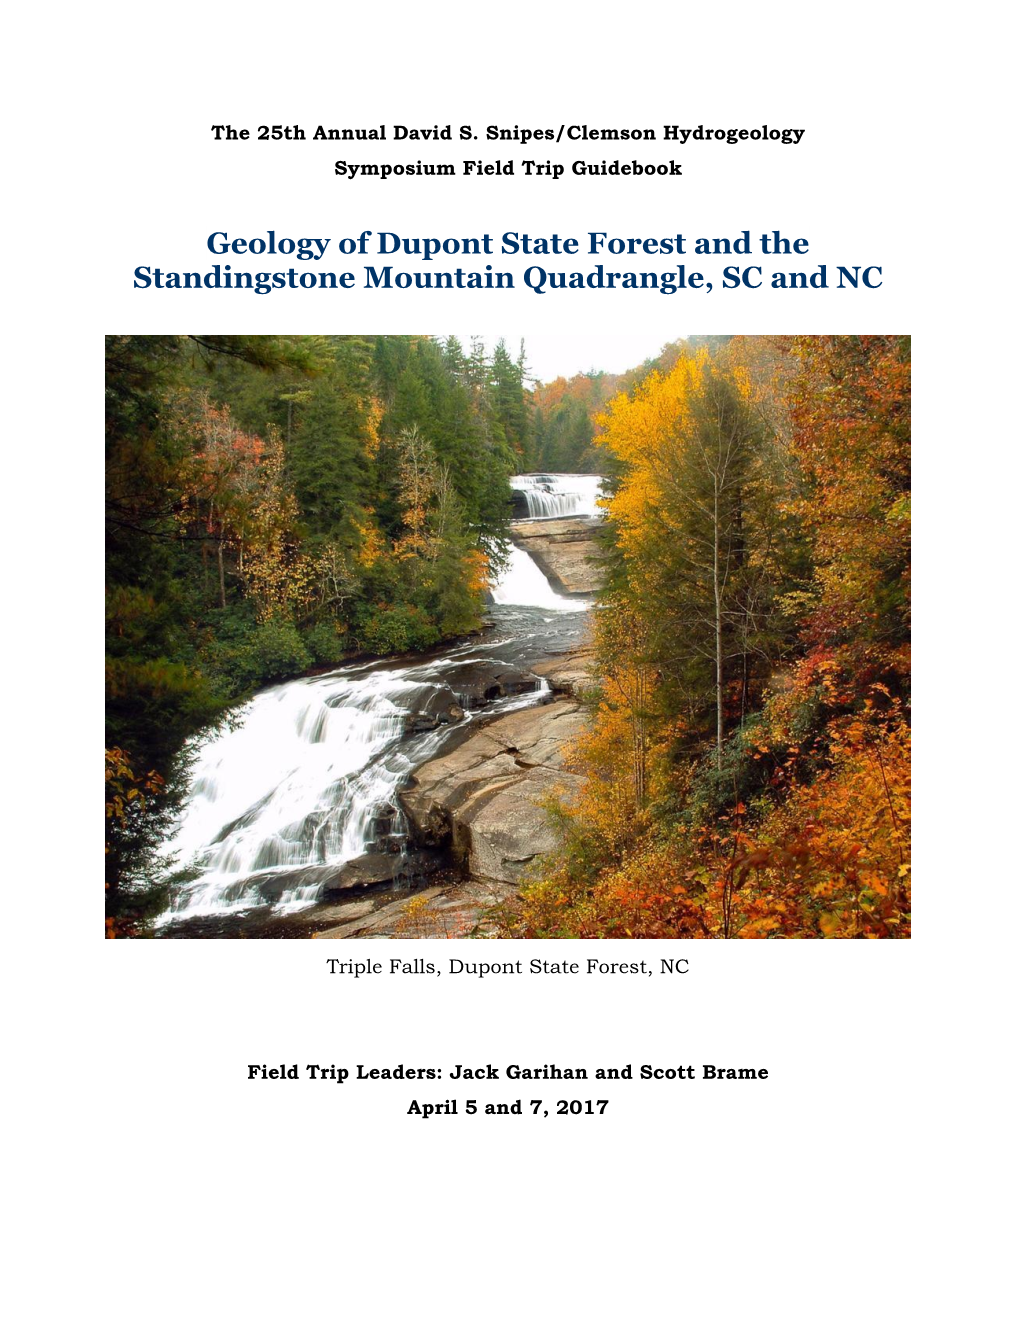 Geology of Dupont State Forest and the Standingstone Mountain Quadrangle, SC and NC